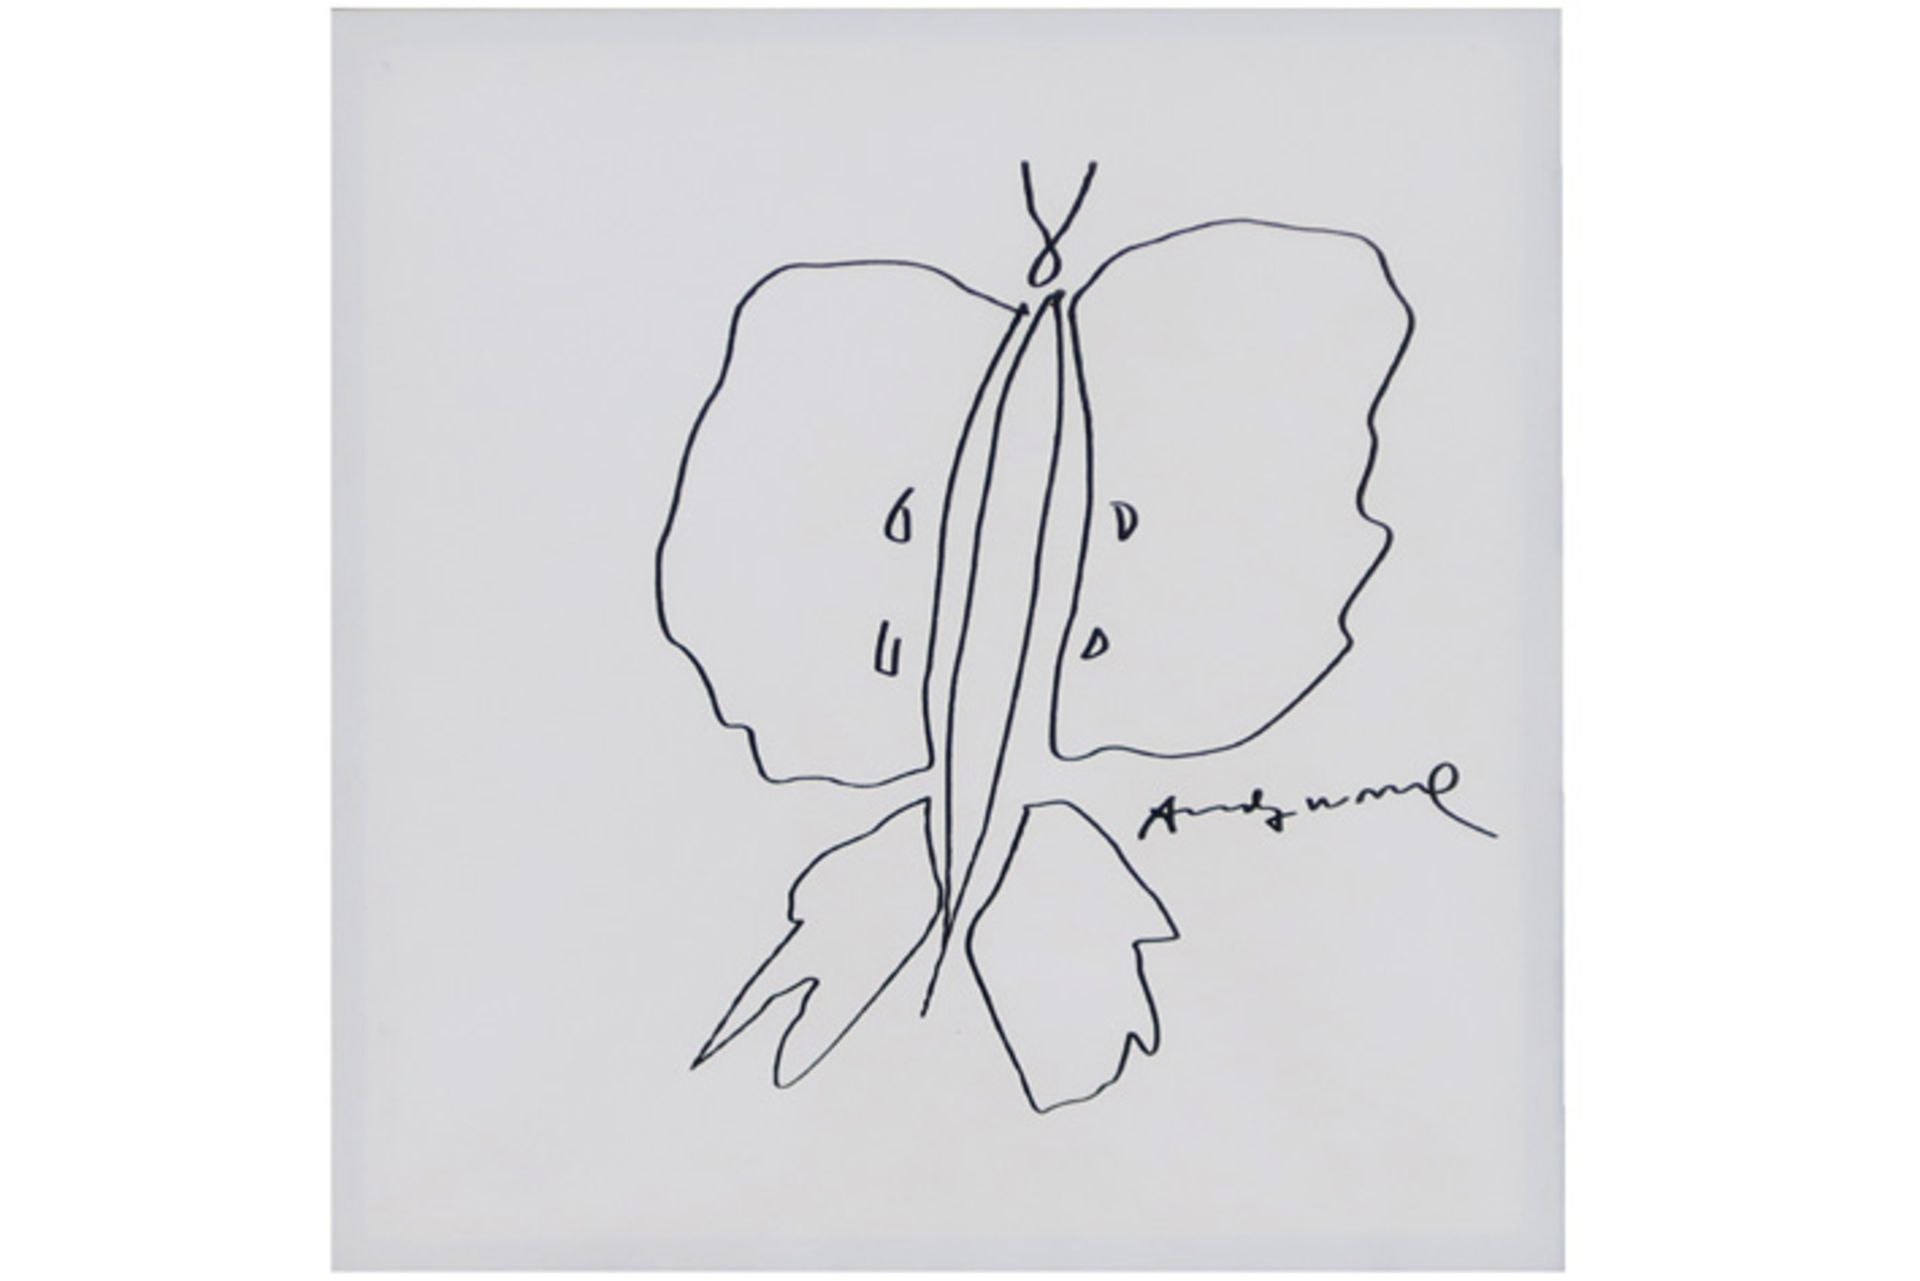 signed Andy Warhol "Butterfly" drawing, sold with the book "Vanishing animals" by Warhol and Kurt